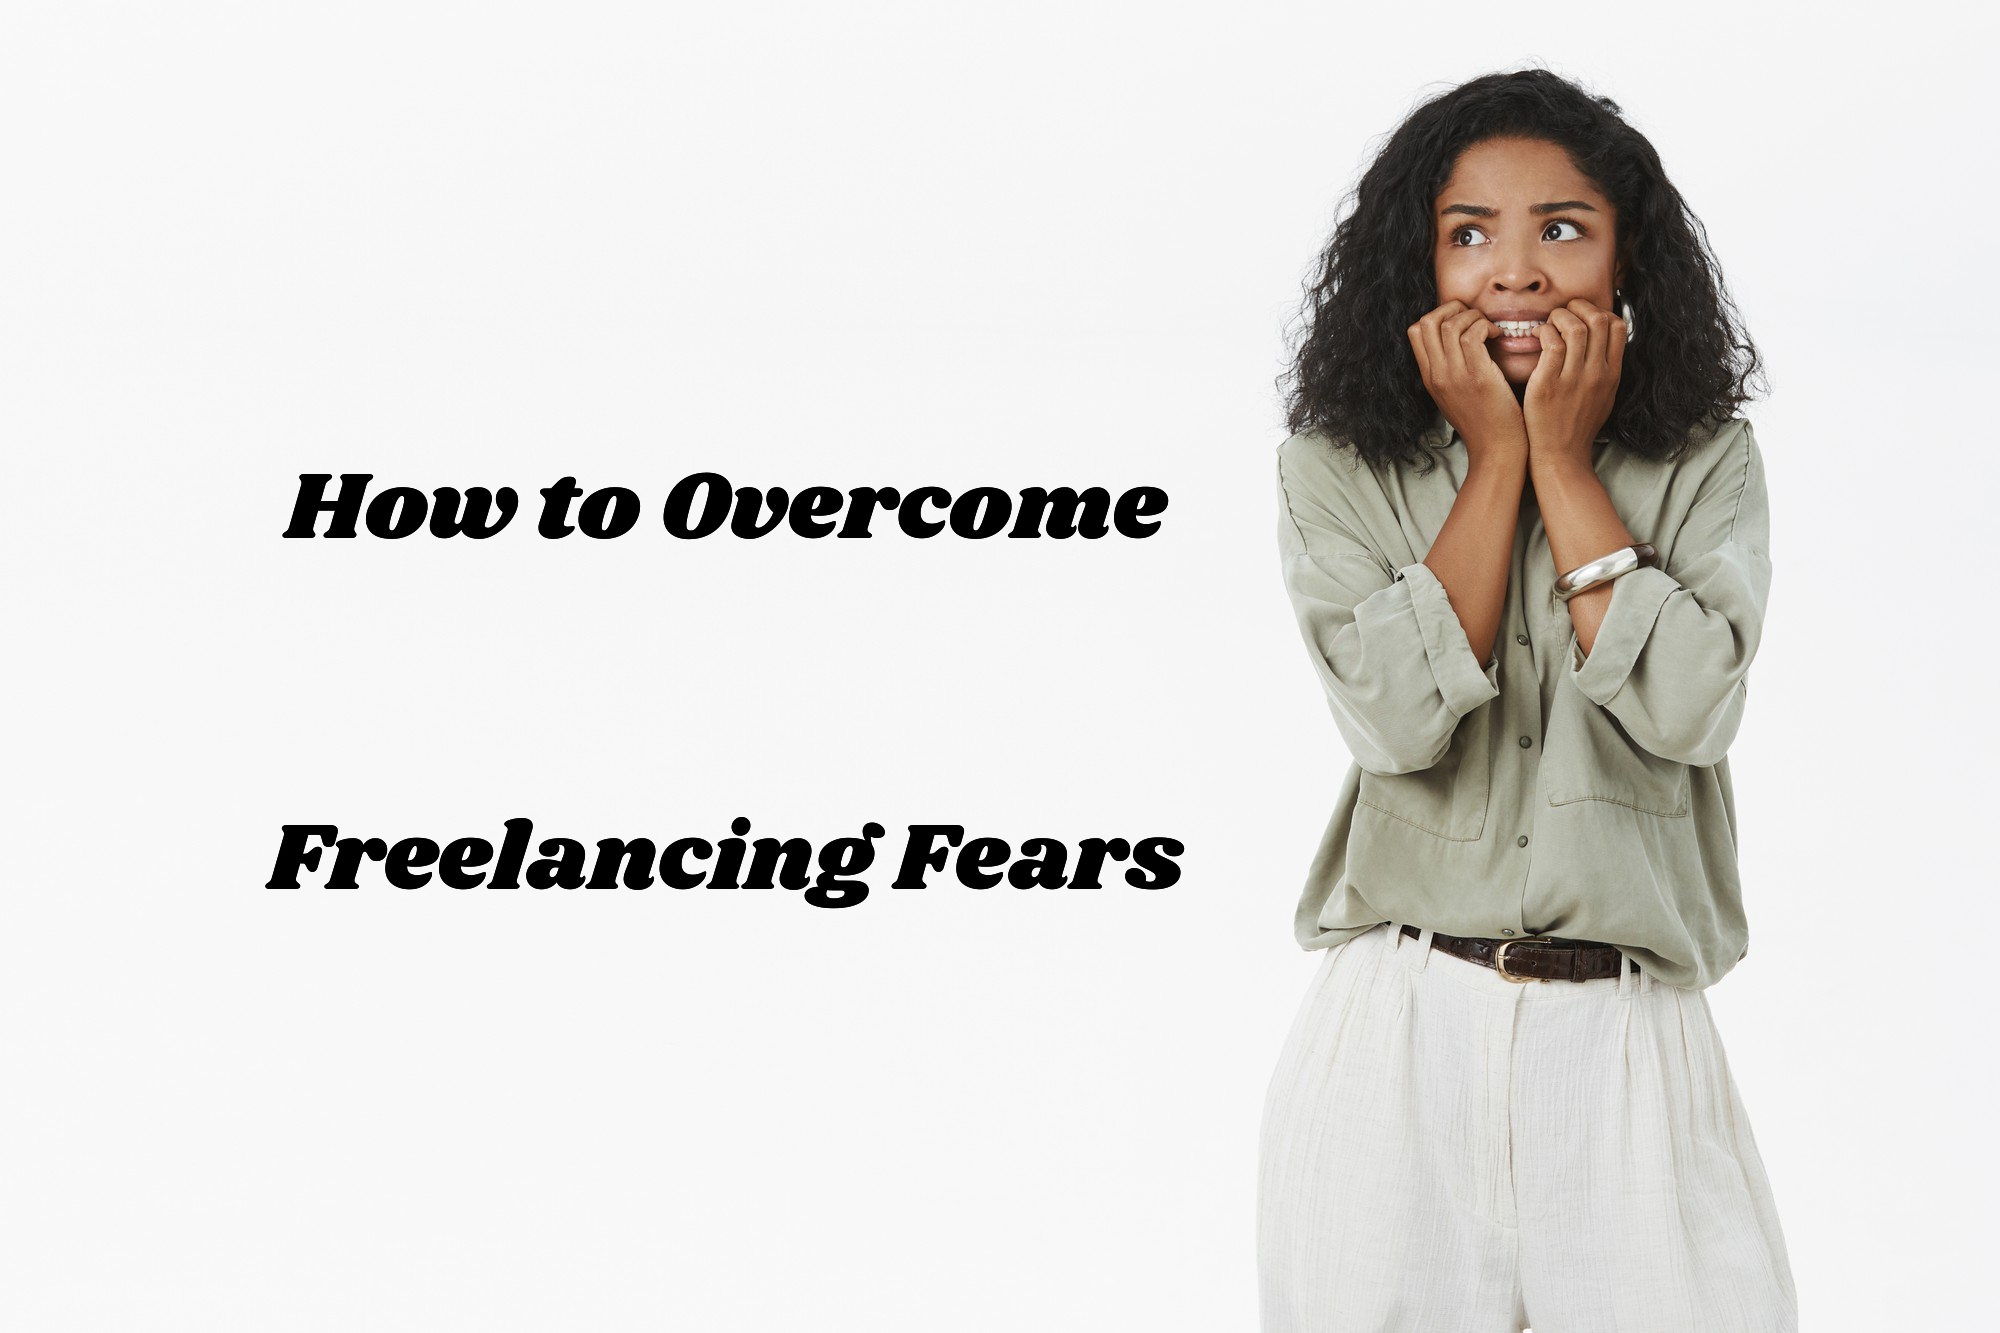 How to Overcome Freelancing Fears